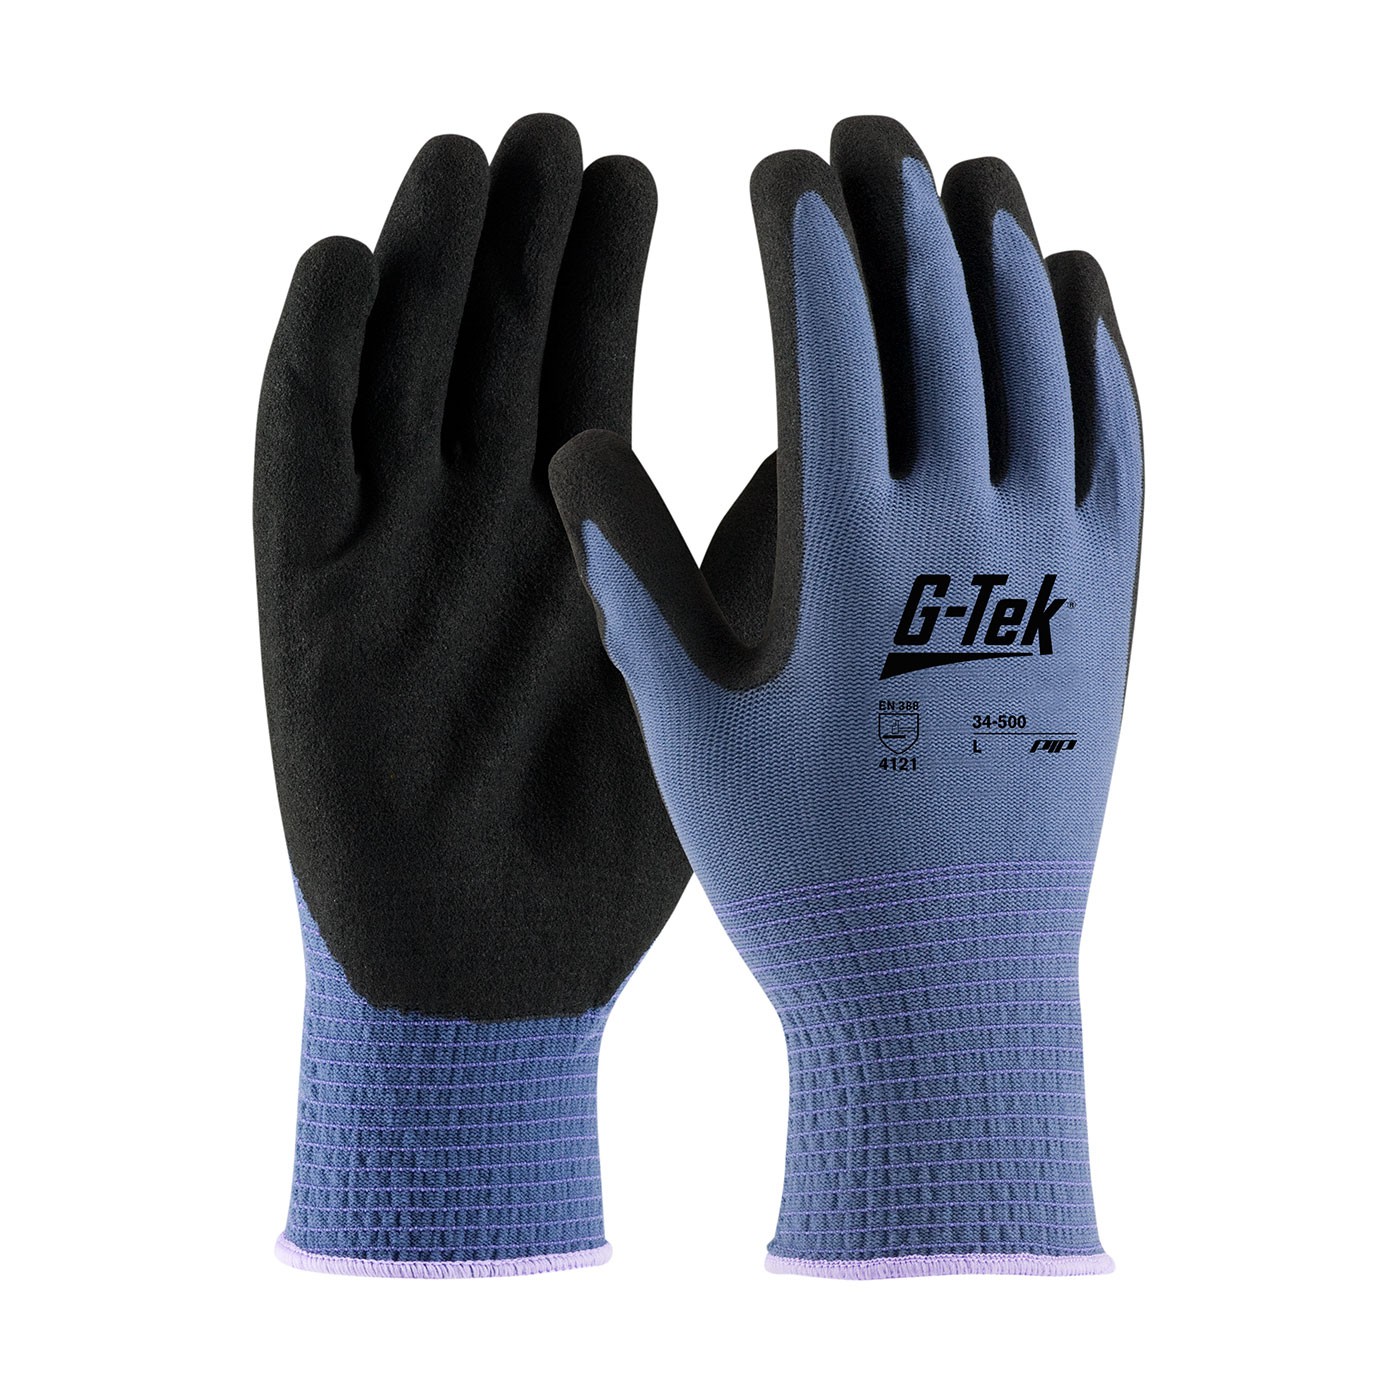 G-Tek® GP™ Seamless Knit Nylon Glove with Nitrile Coated MicroSurface Grip on Palm & Fingers - 13 Gauge (#34-500)